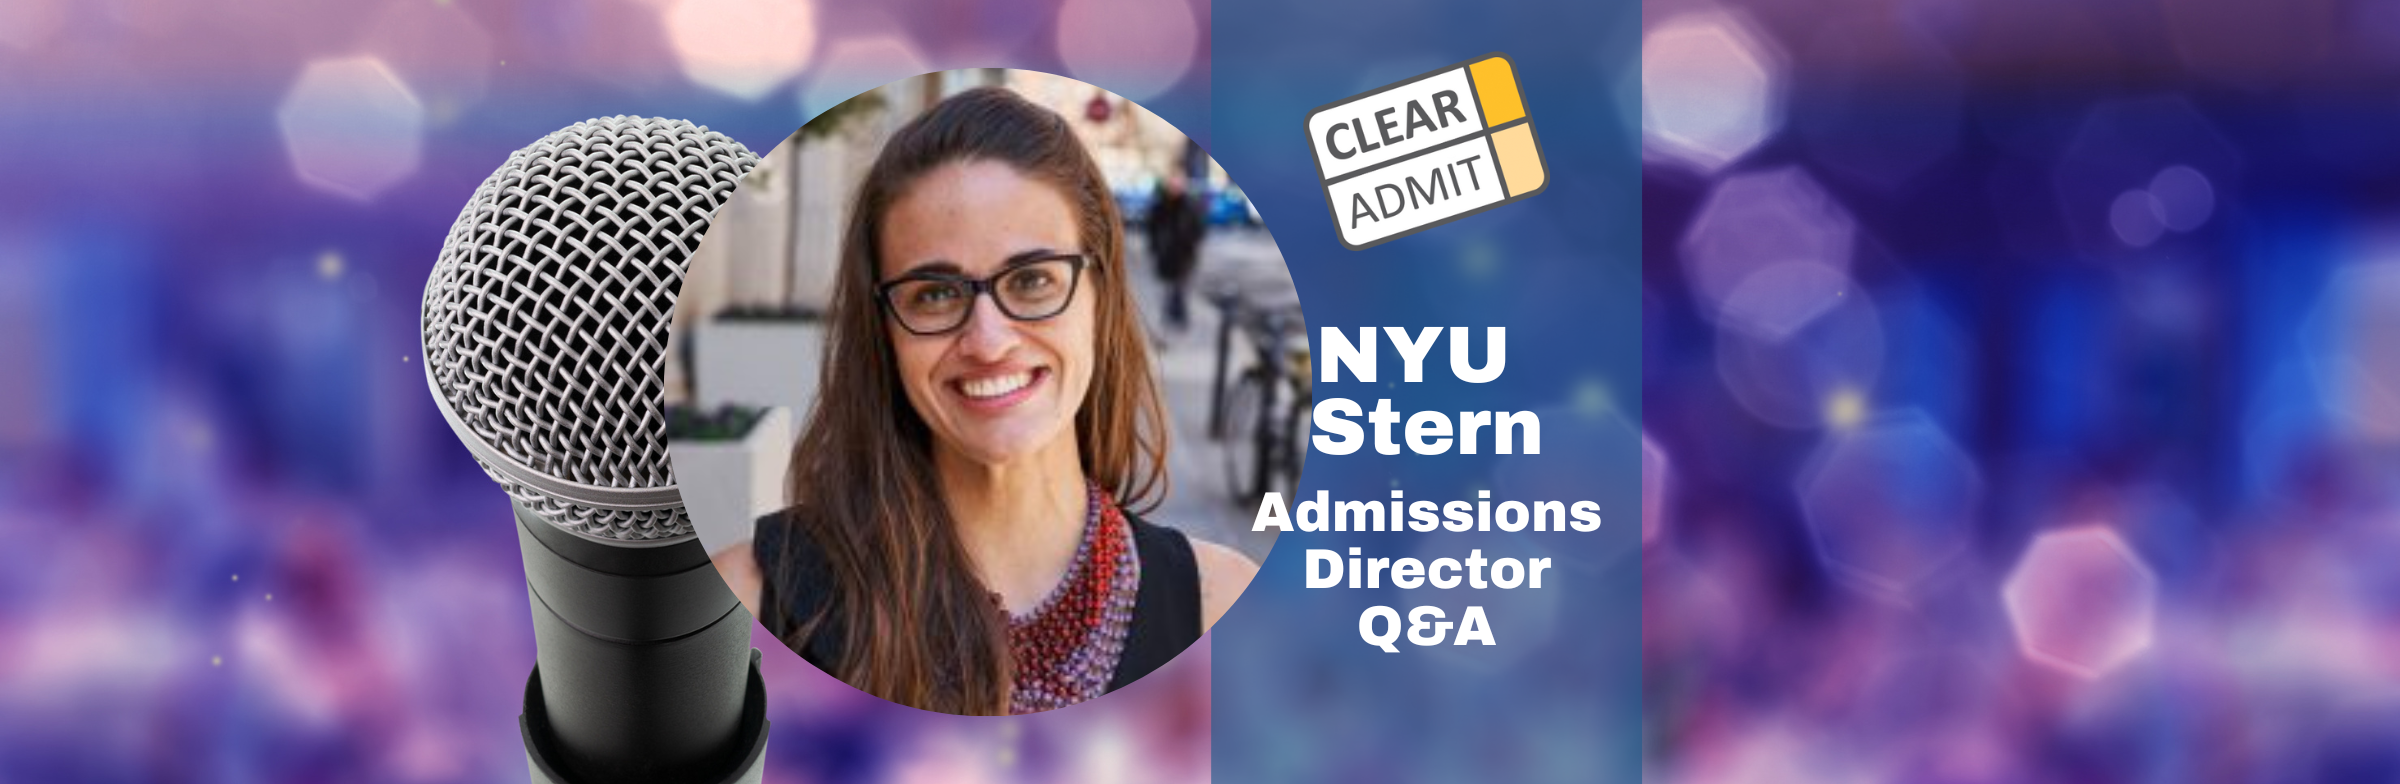 Image for Admissions Director Q&A: Lisa Rios of the NYU Stern School of Business